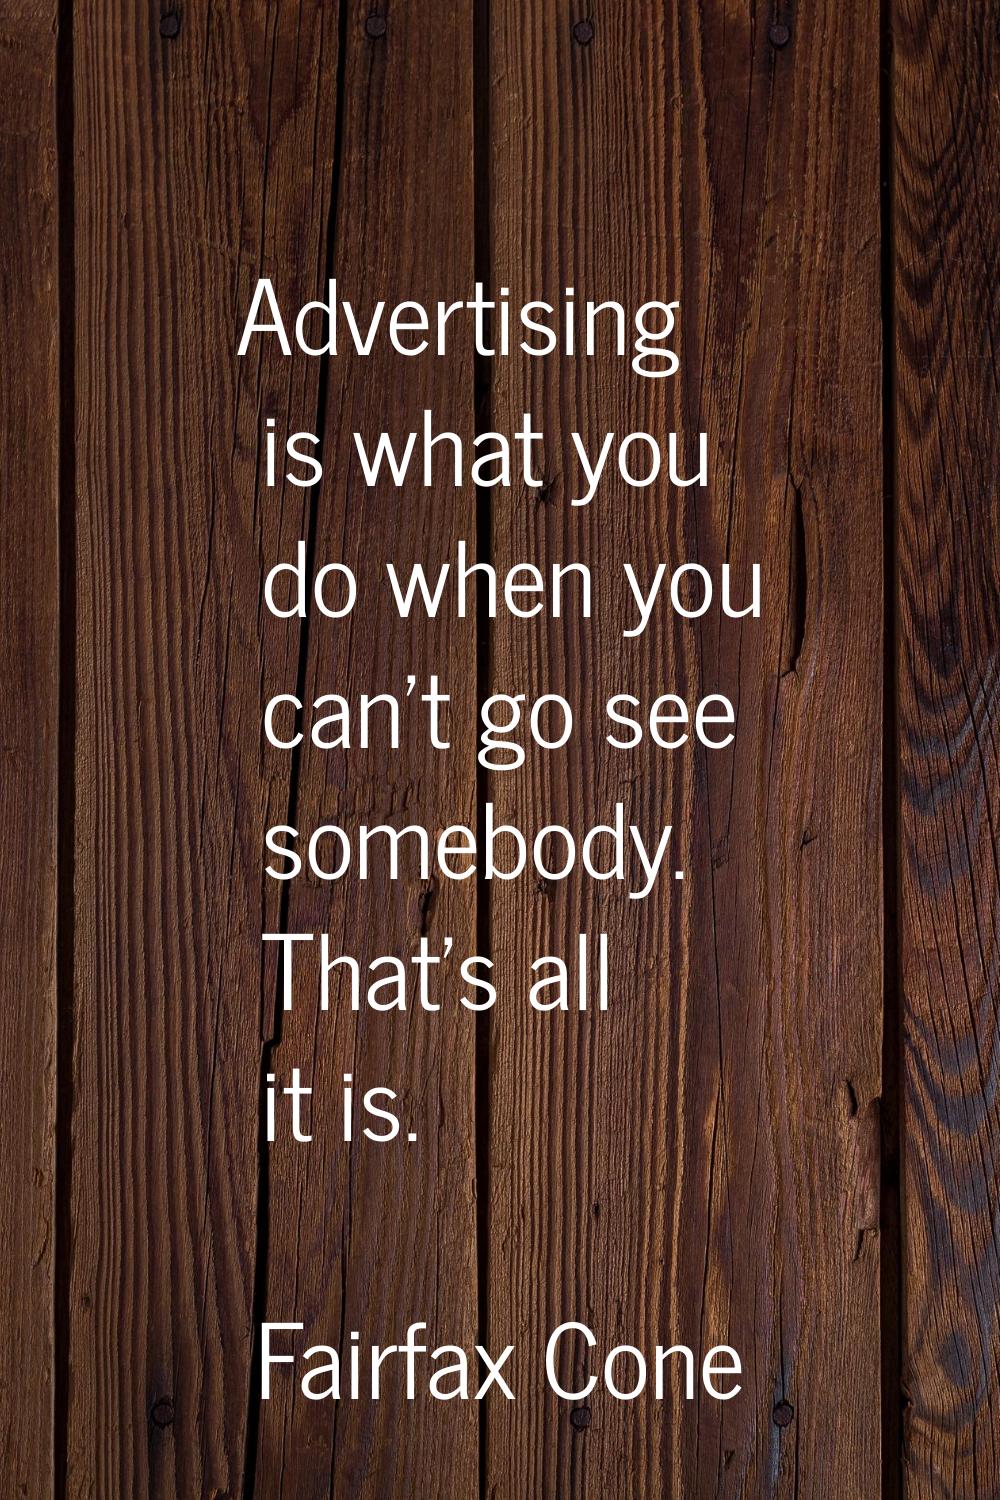 Advertising is what you do when you can't go see somebody. That's all it is.